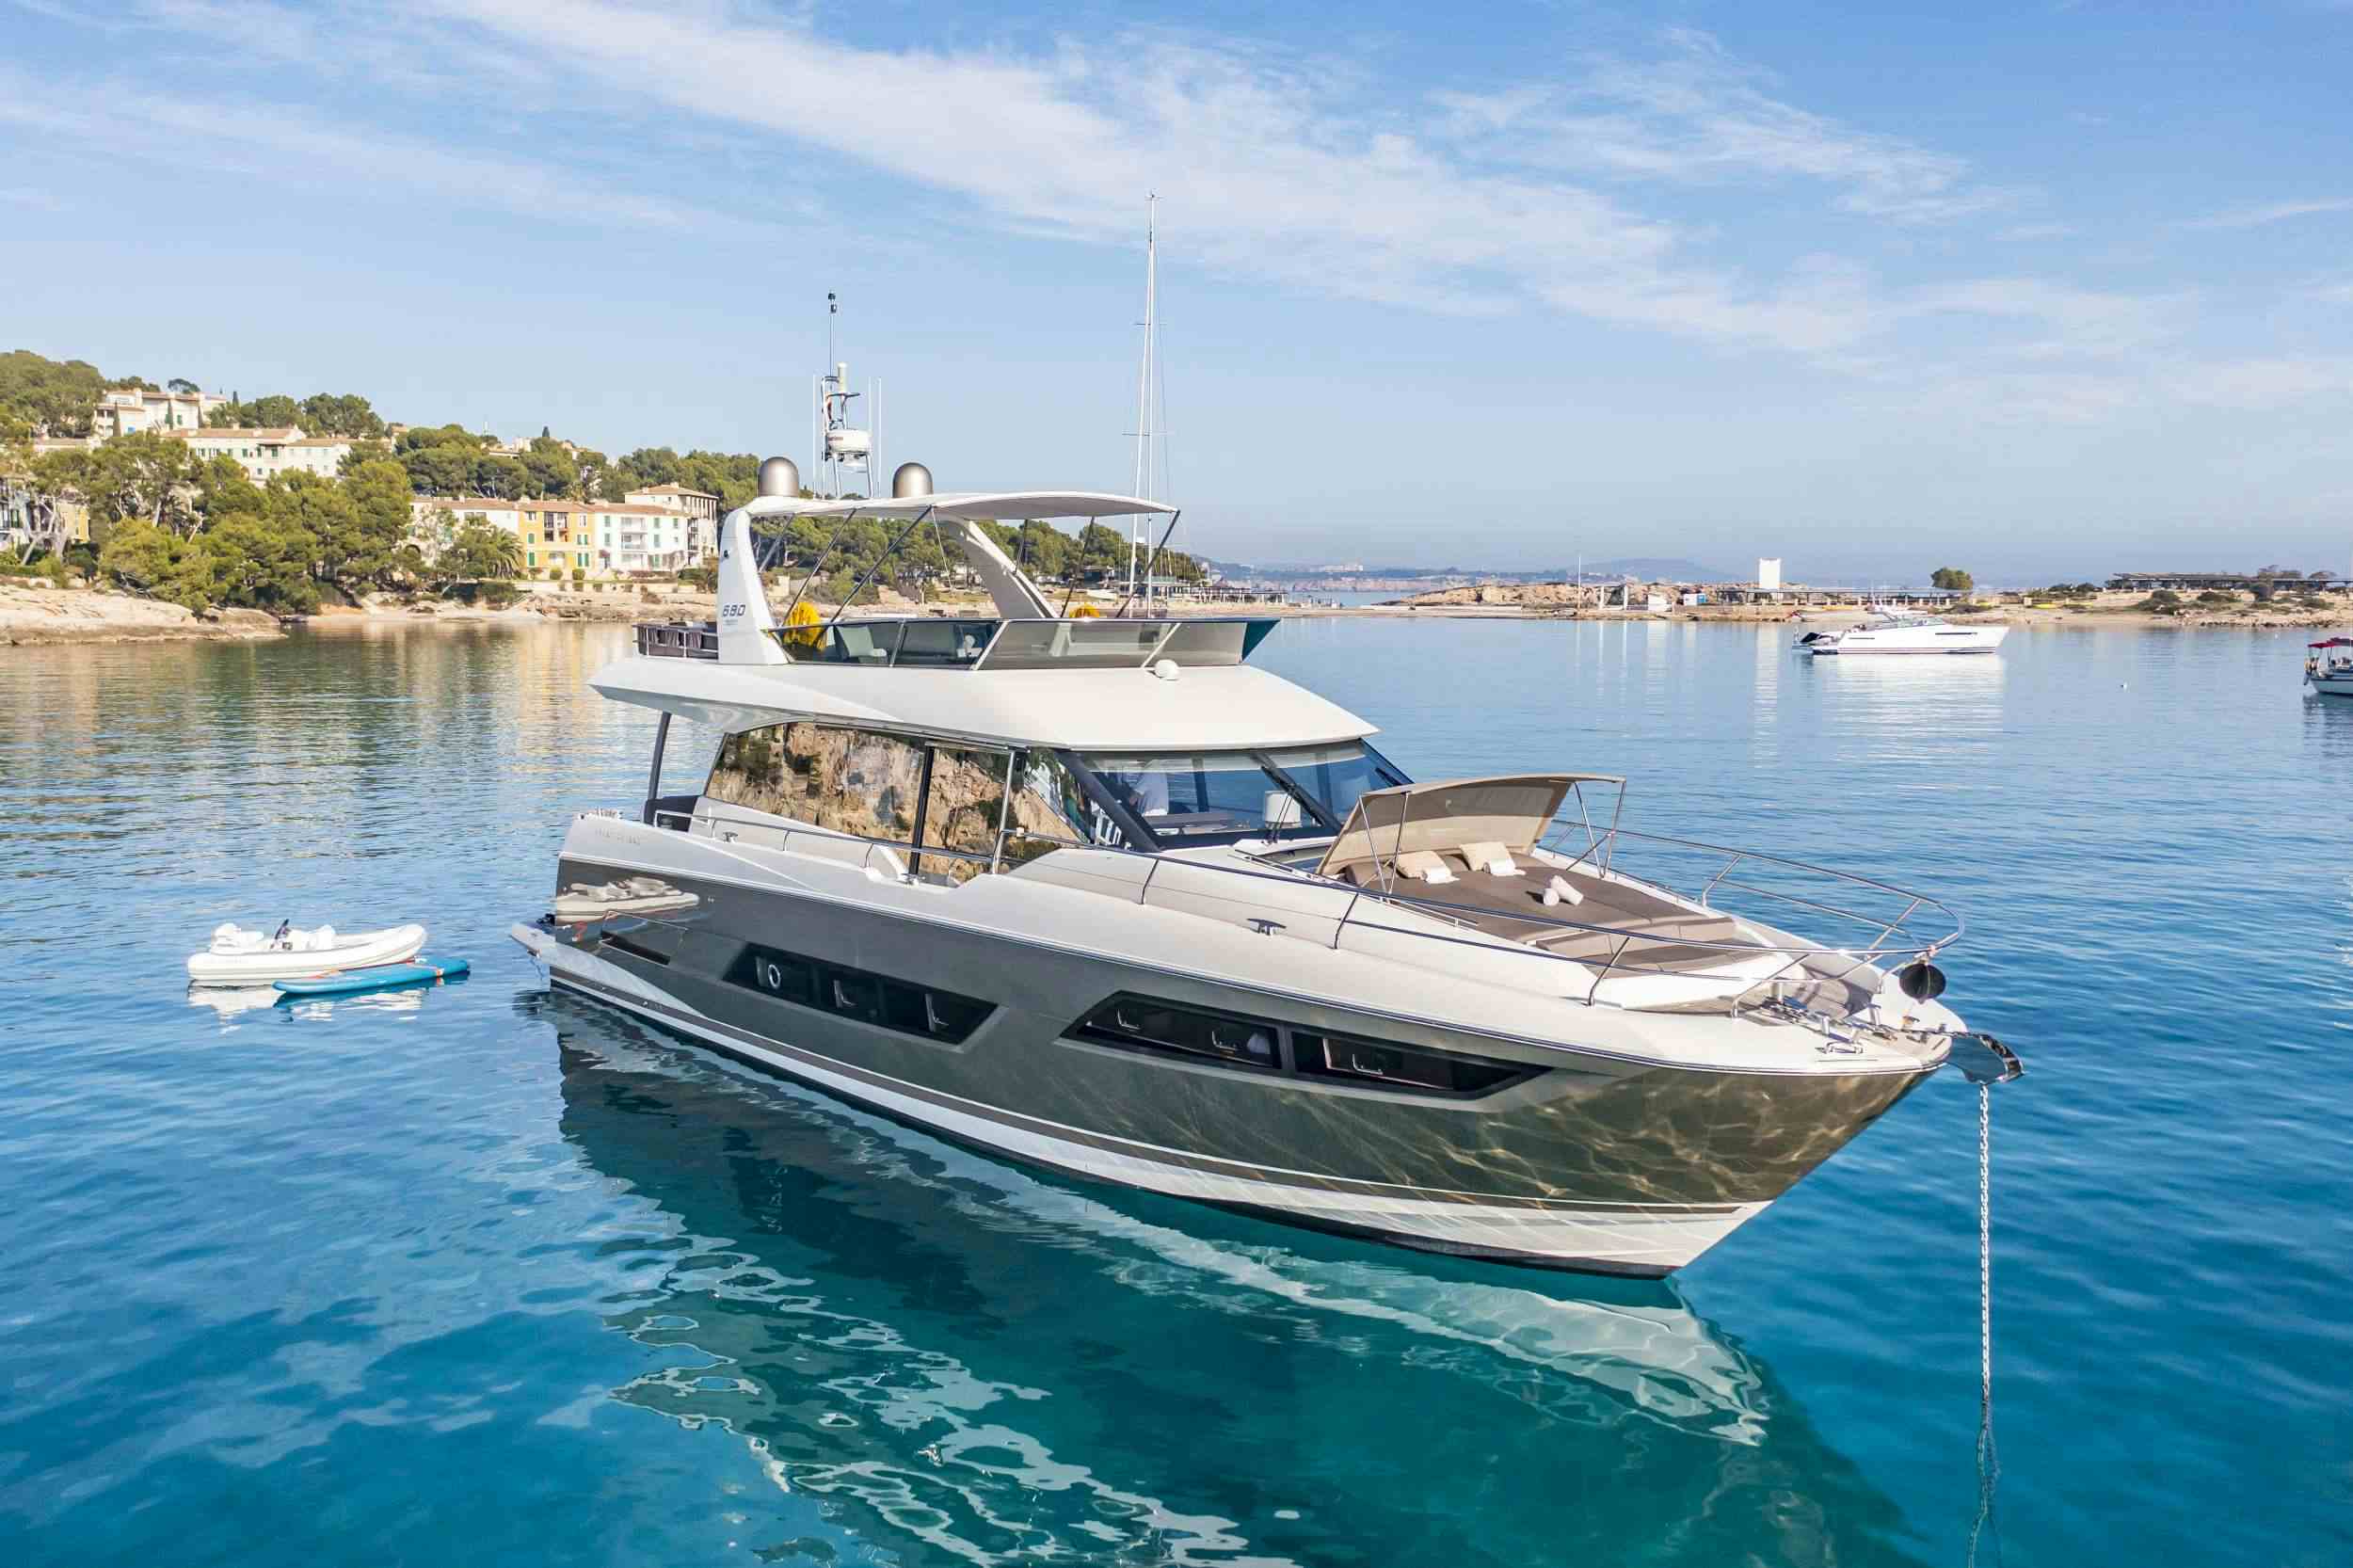 BLUE M - Yacht Charter Antibes & Boat hire in W. Med -Naples/Sicily, W. Med -Riviera/Cors/Sard., W. Med - Spain/Balearics | Winter: Caribbean Virgin Islands (US/BVI), Caribbean Leewards, Caribbean Windwards 1